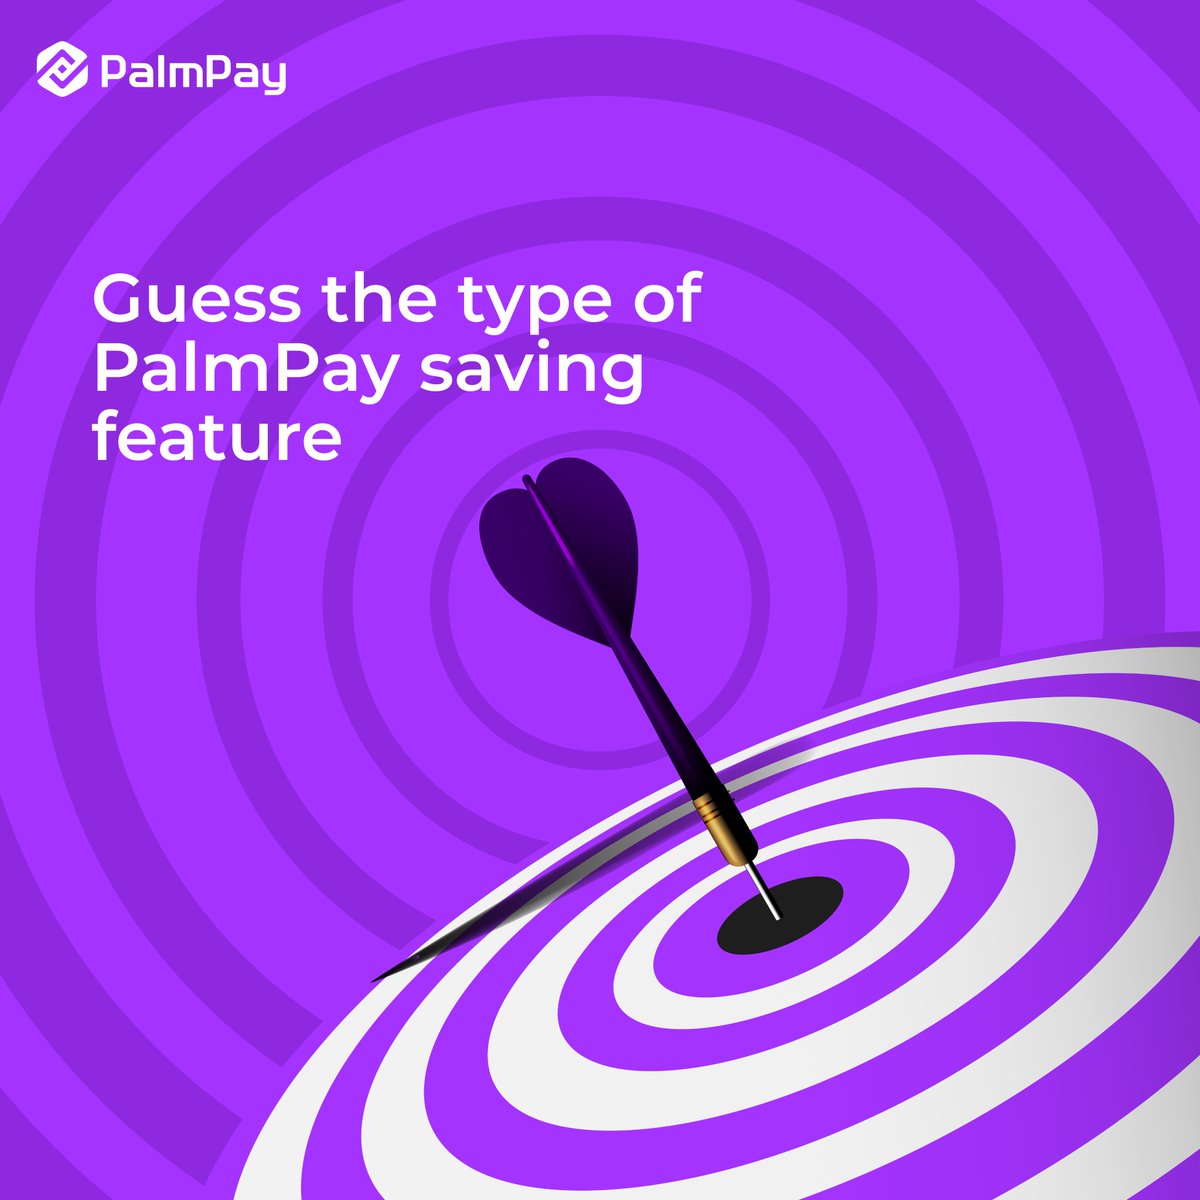 How familiar are you with our different types of saving features? What type of PalmPay saving feature is this from the picture? Let us know in the comments! #PalmPay